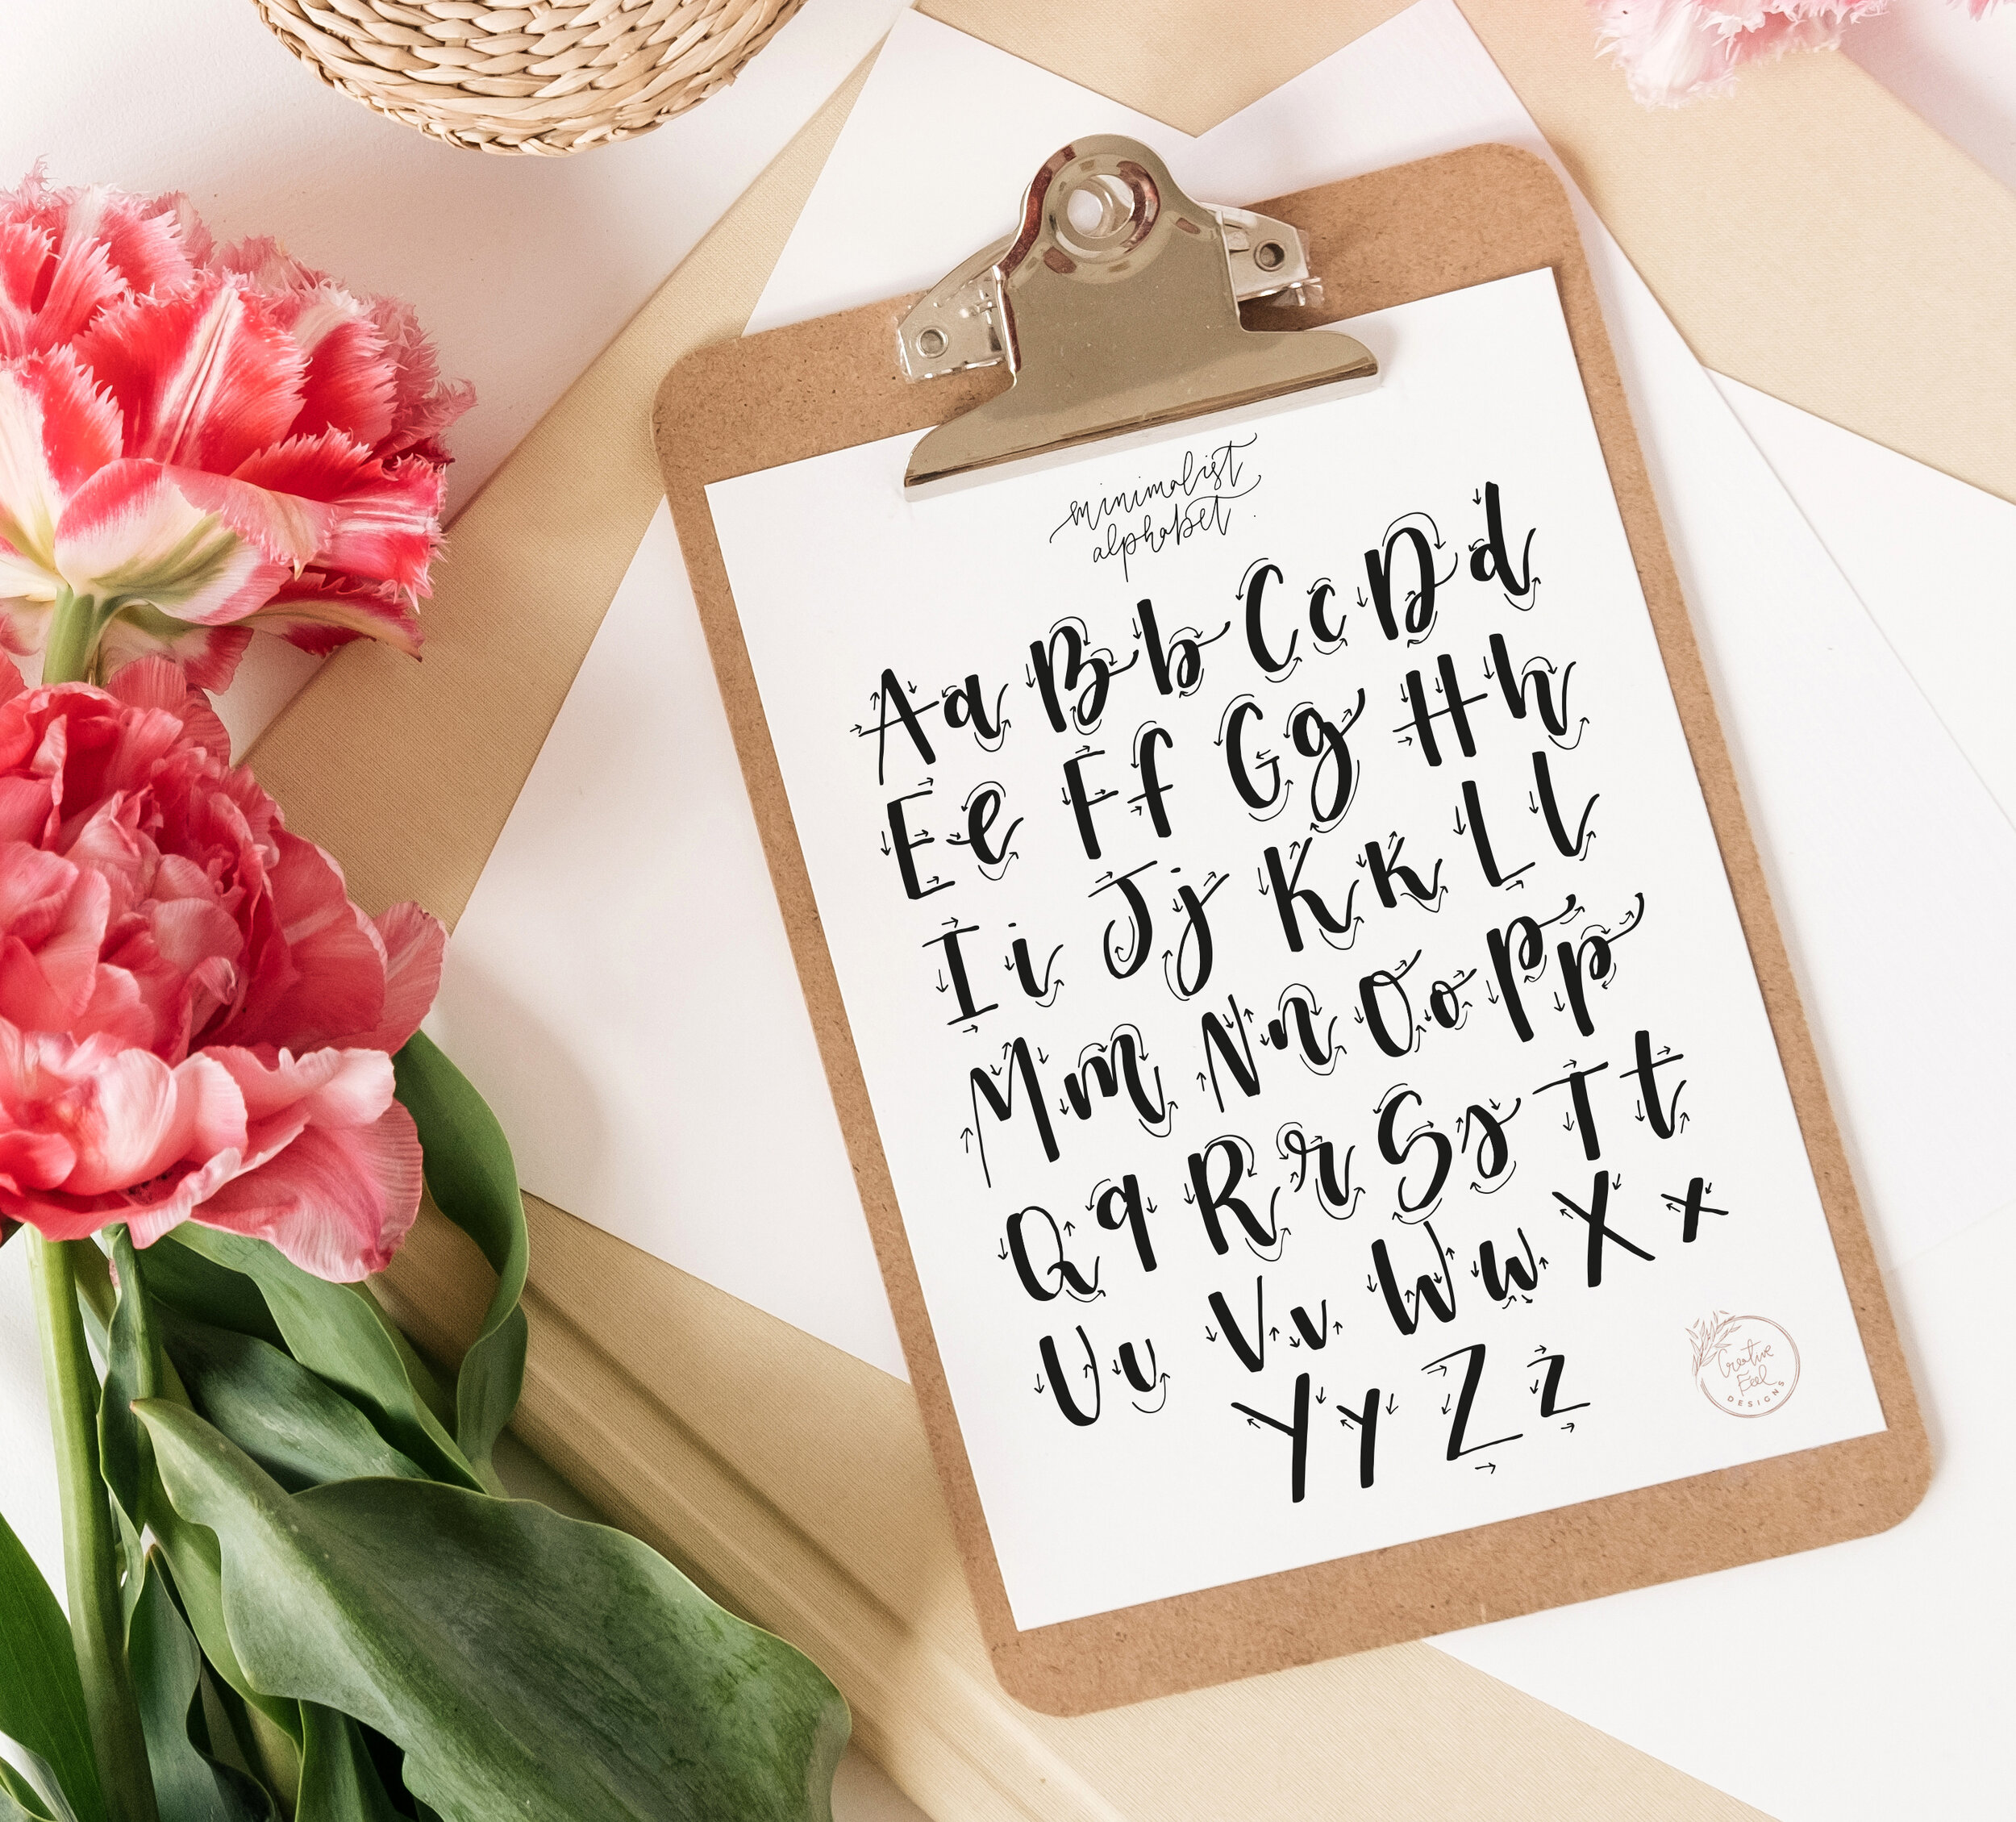 Modern Calligraphy and Hand Lettering for Beginners